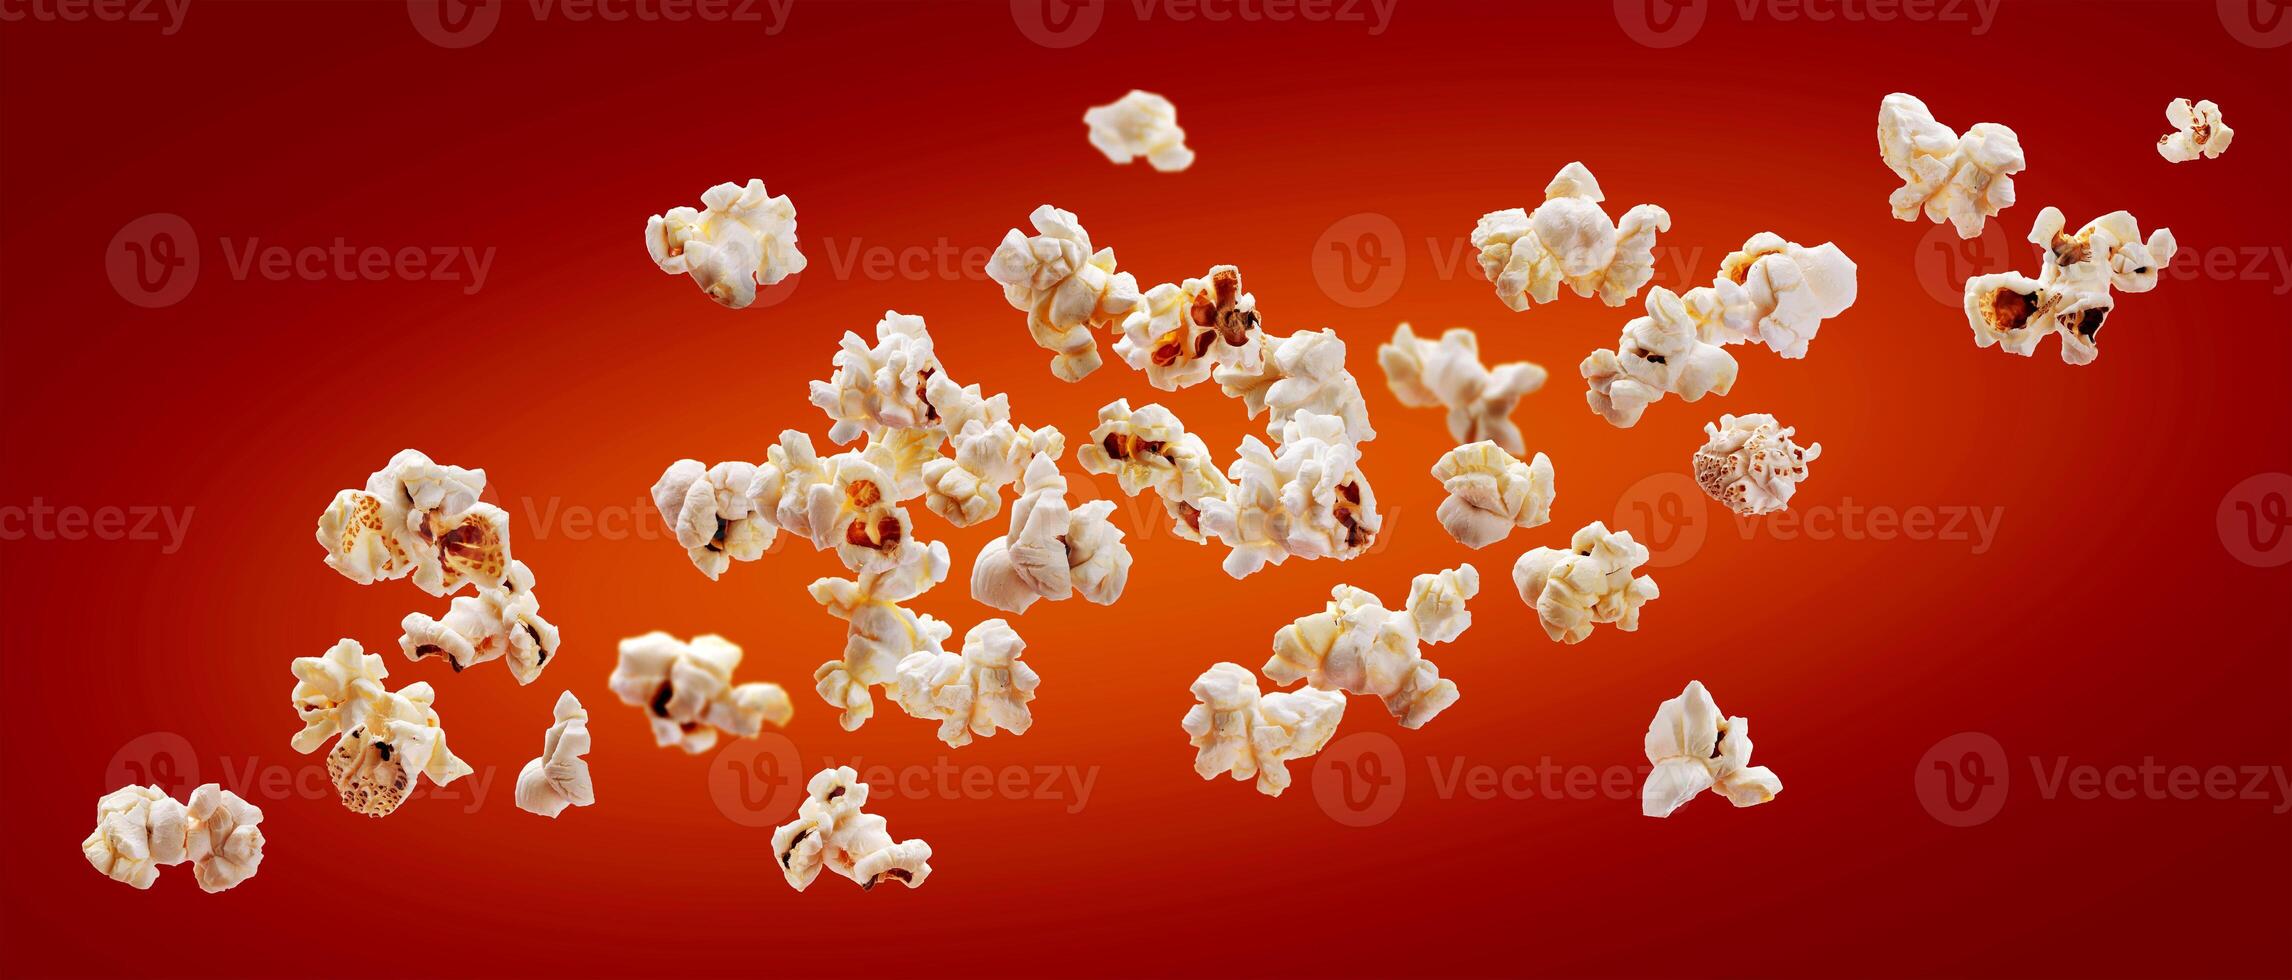 Popcorn isolated on red background. Falling or flying popcorn. Close-up photo